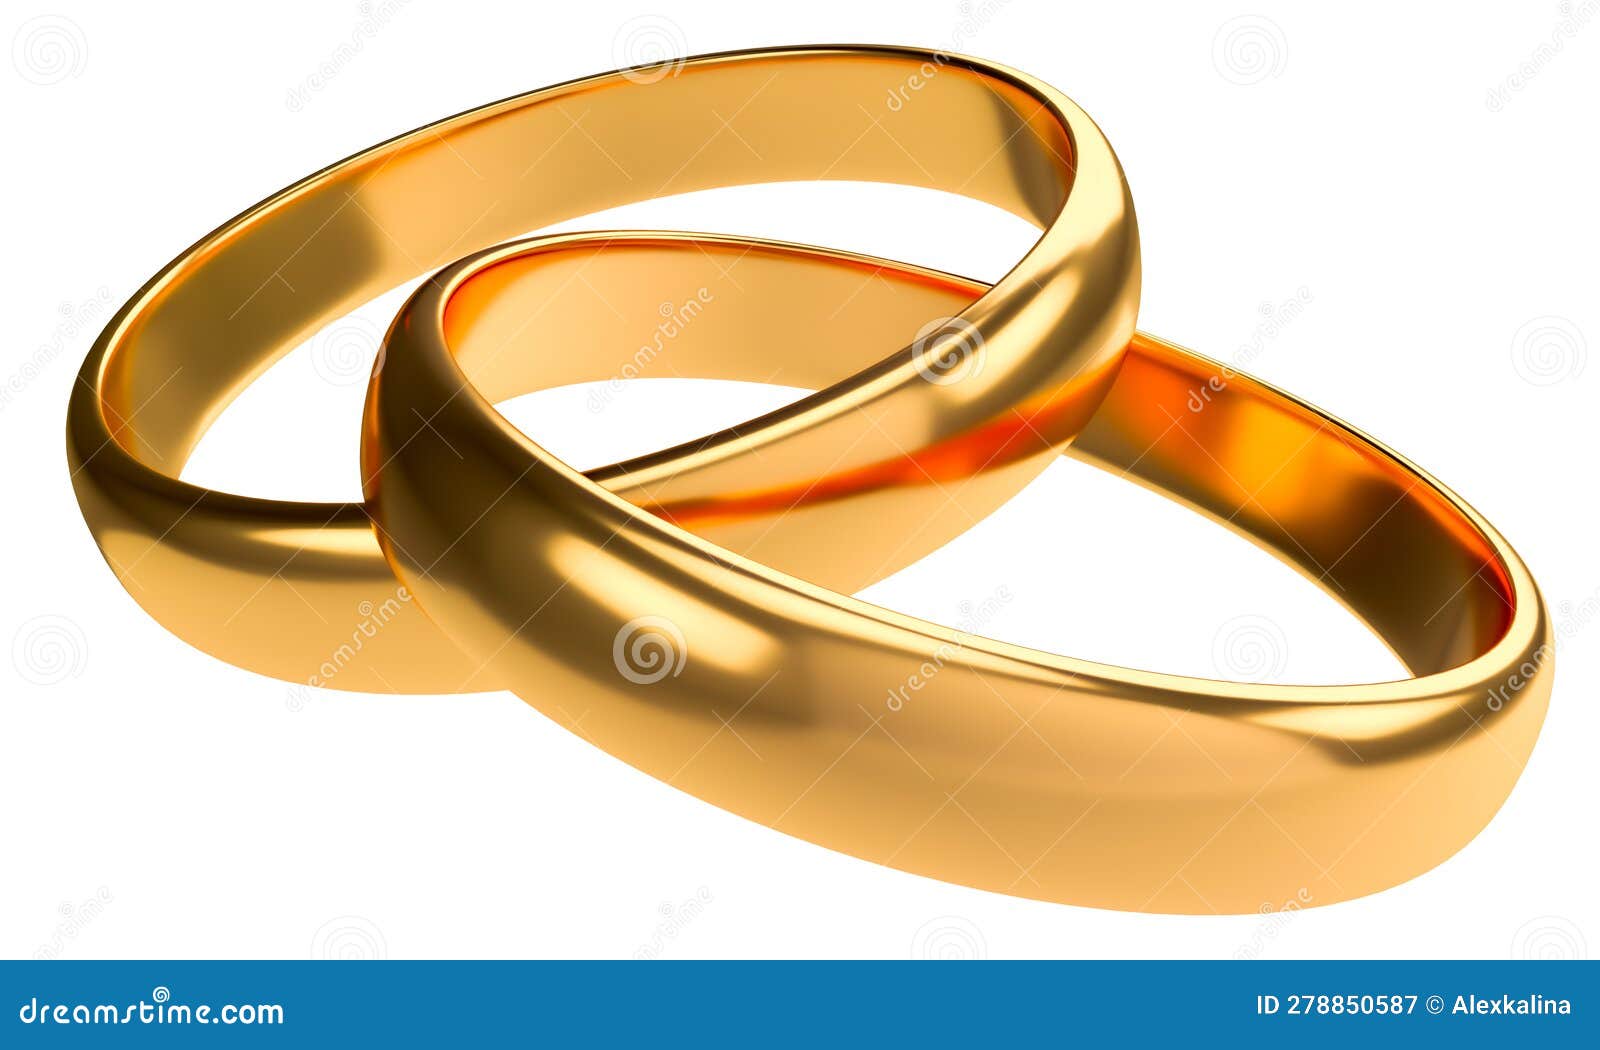 Premium PSD | Golden wedding ring isolated on transparent background png psd